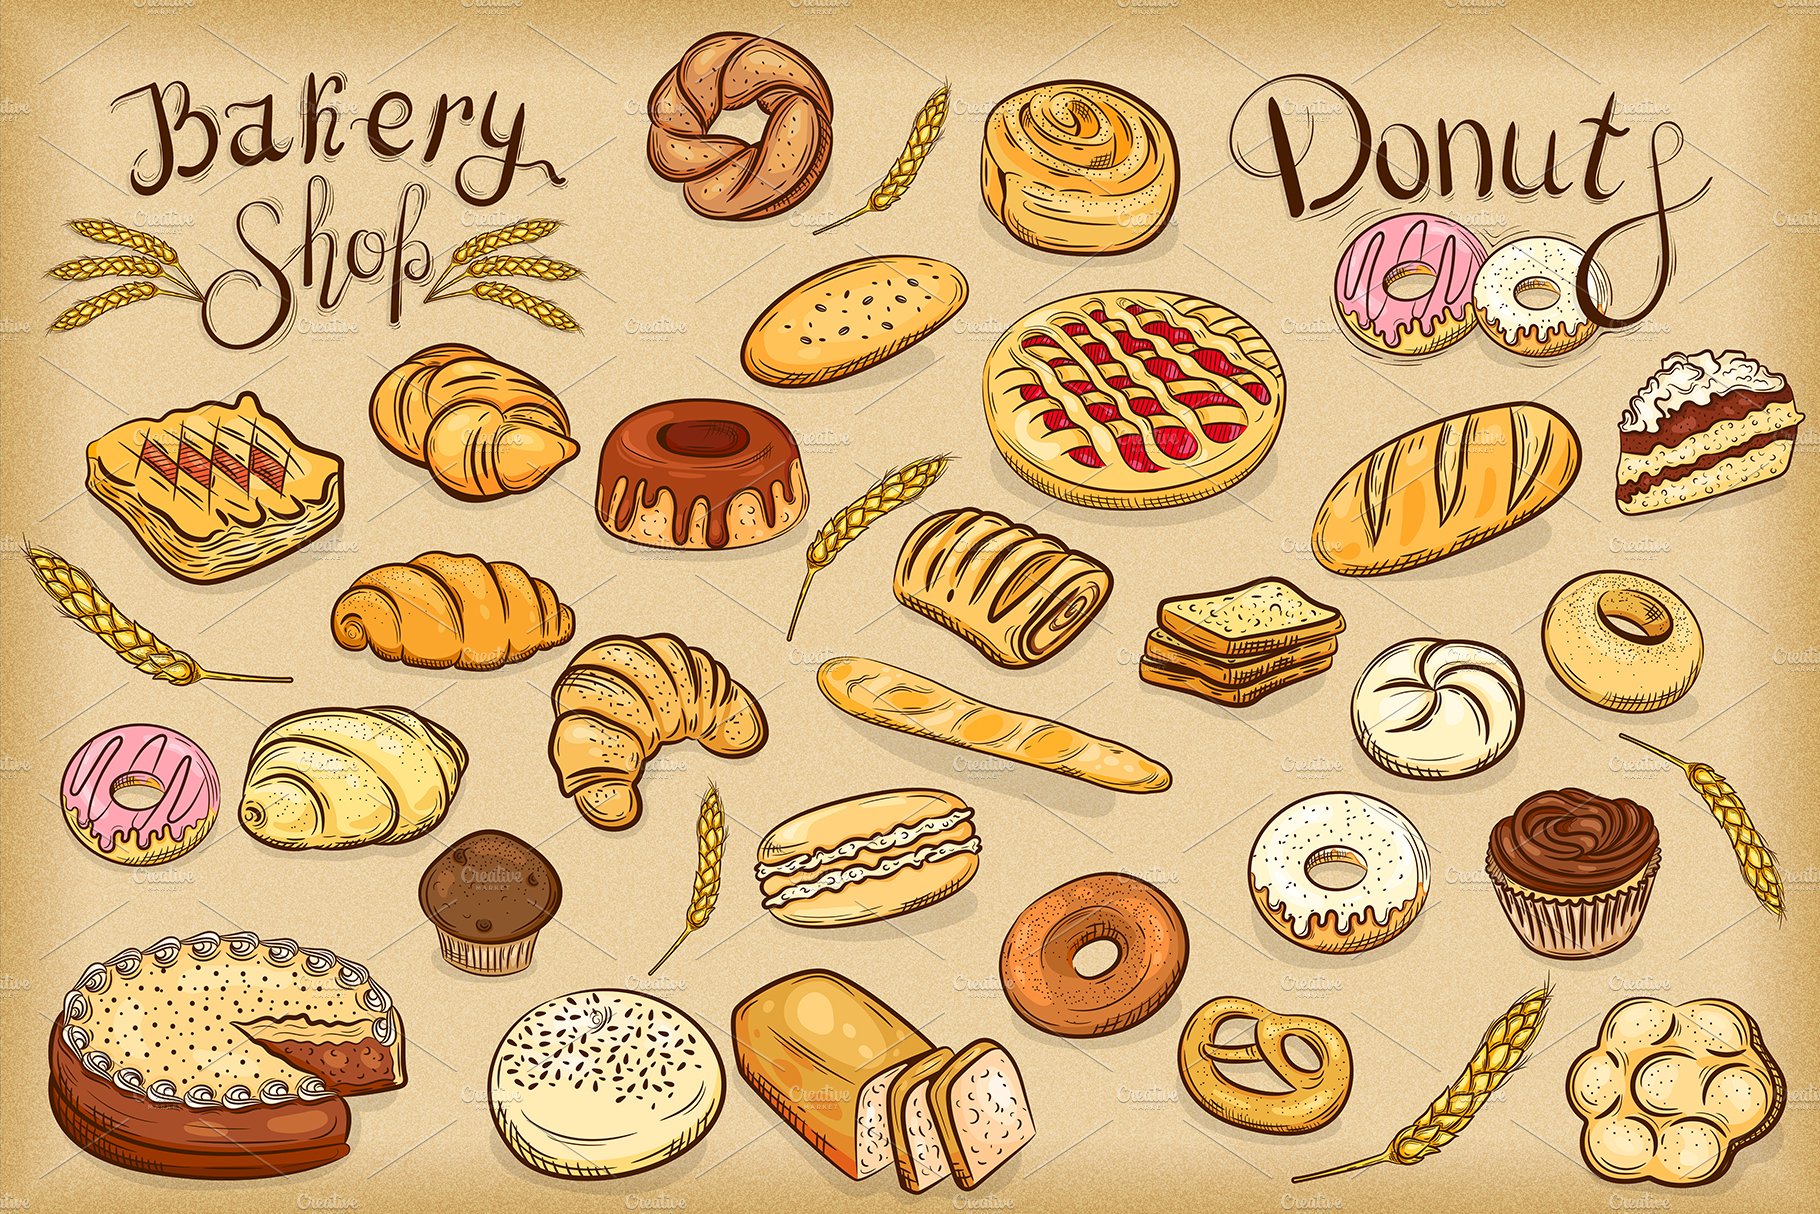 Bakery Shop preview image.